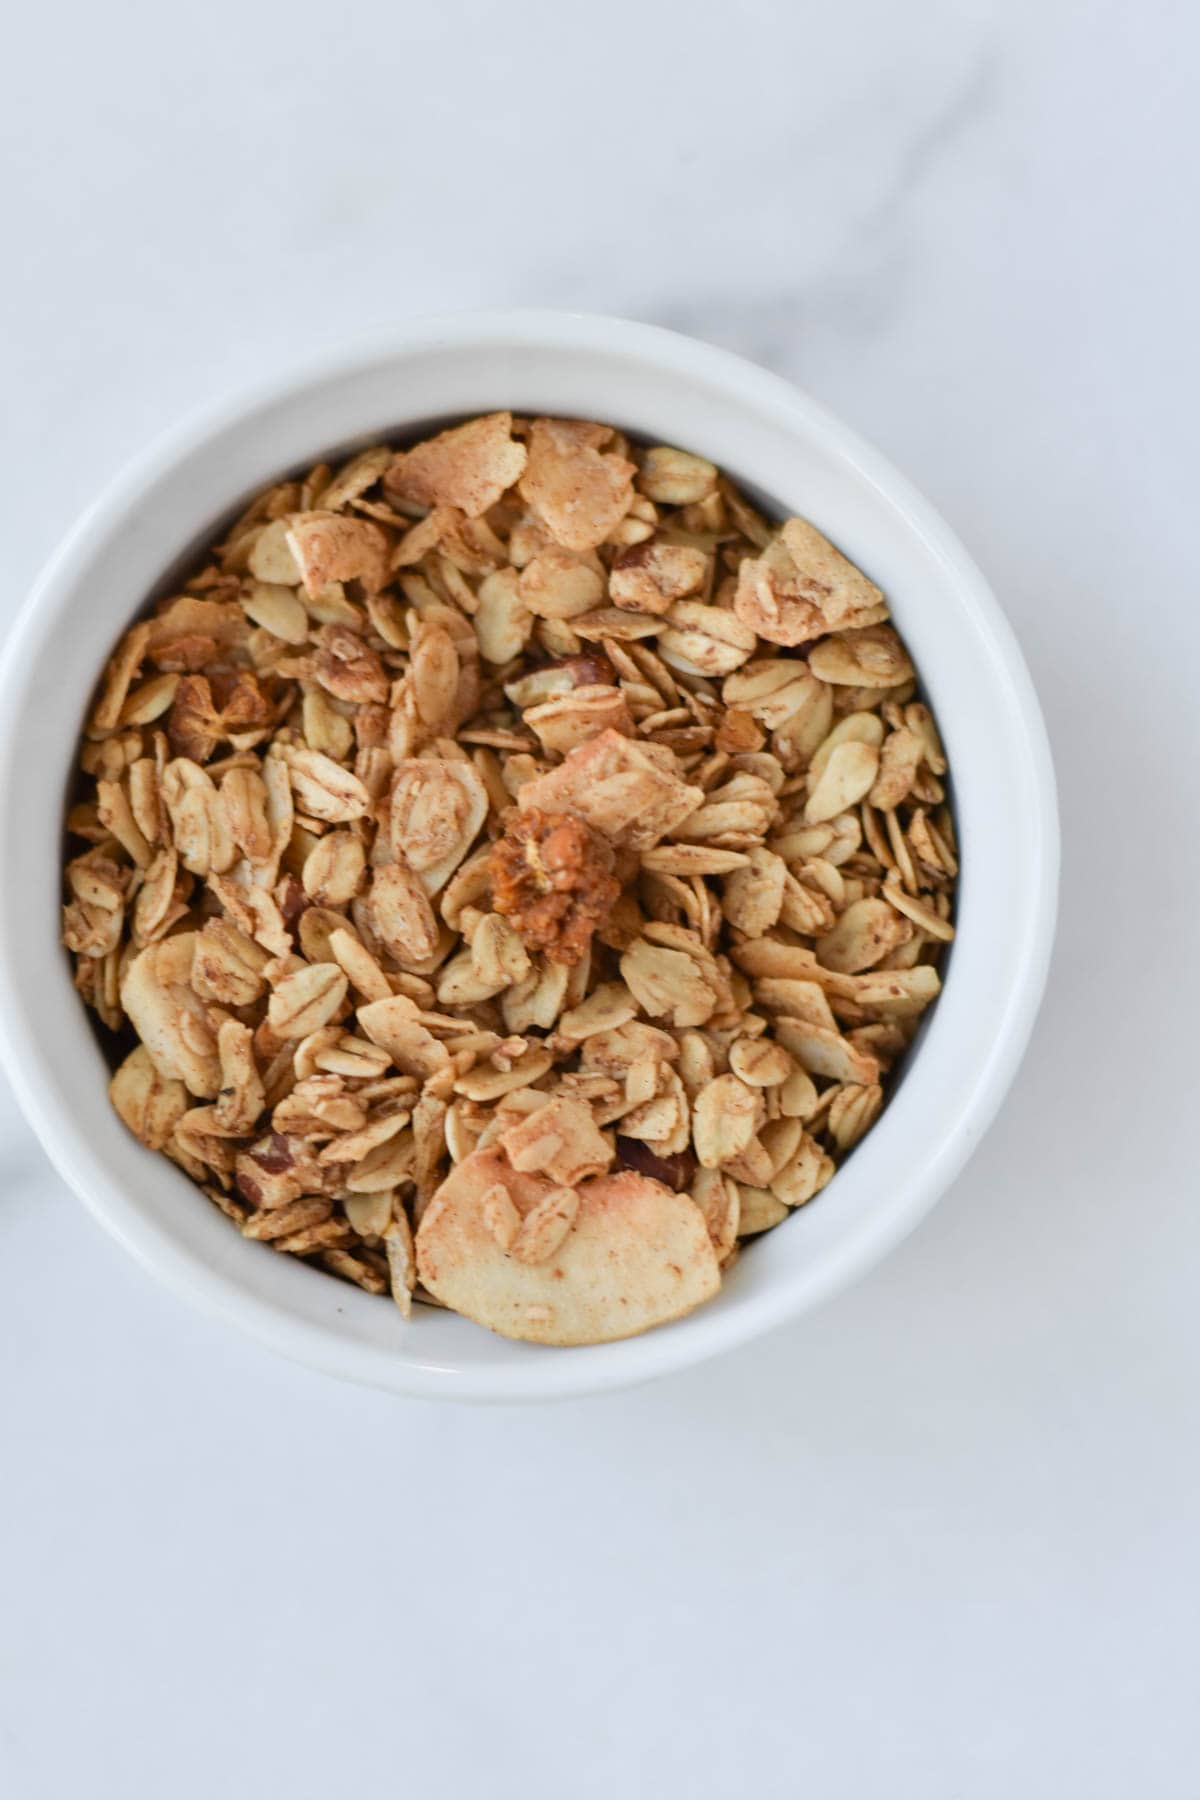 A cup of granola on a marble background.